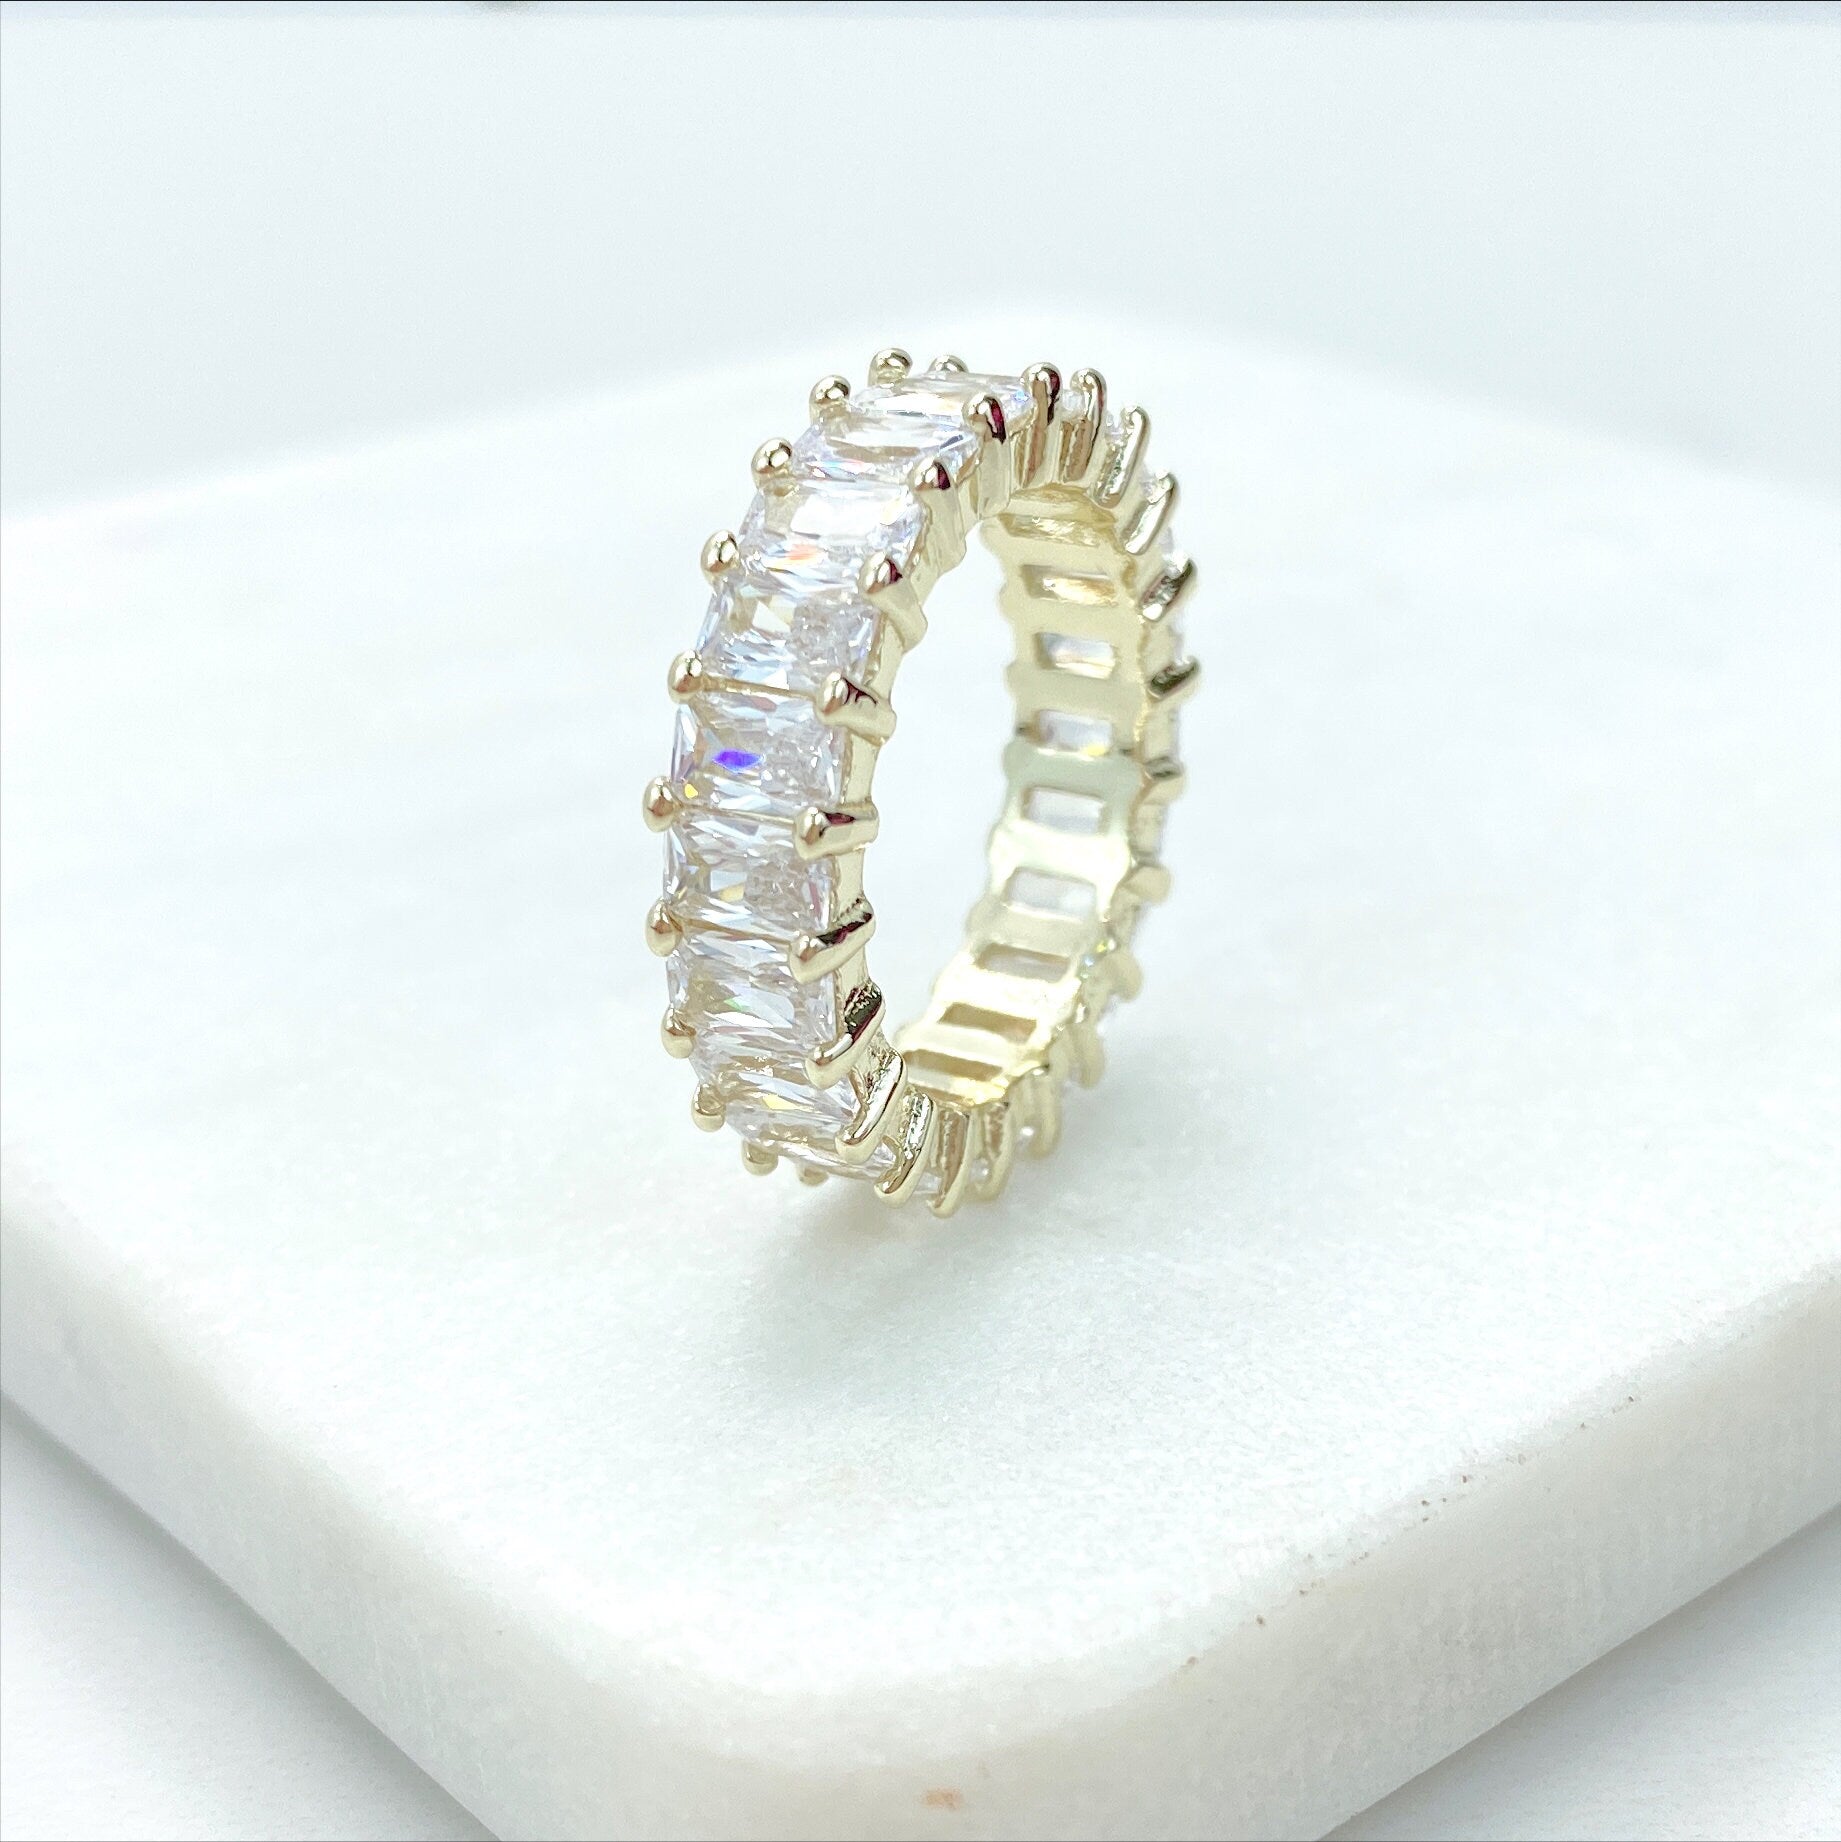 18k Gold Filled Cubic Zirconia Ring Featuring Baguette Settings Wholesale Jewelry Making Supplies